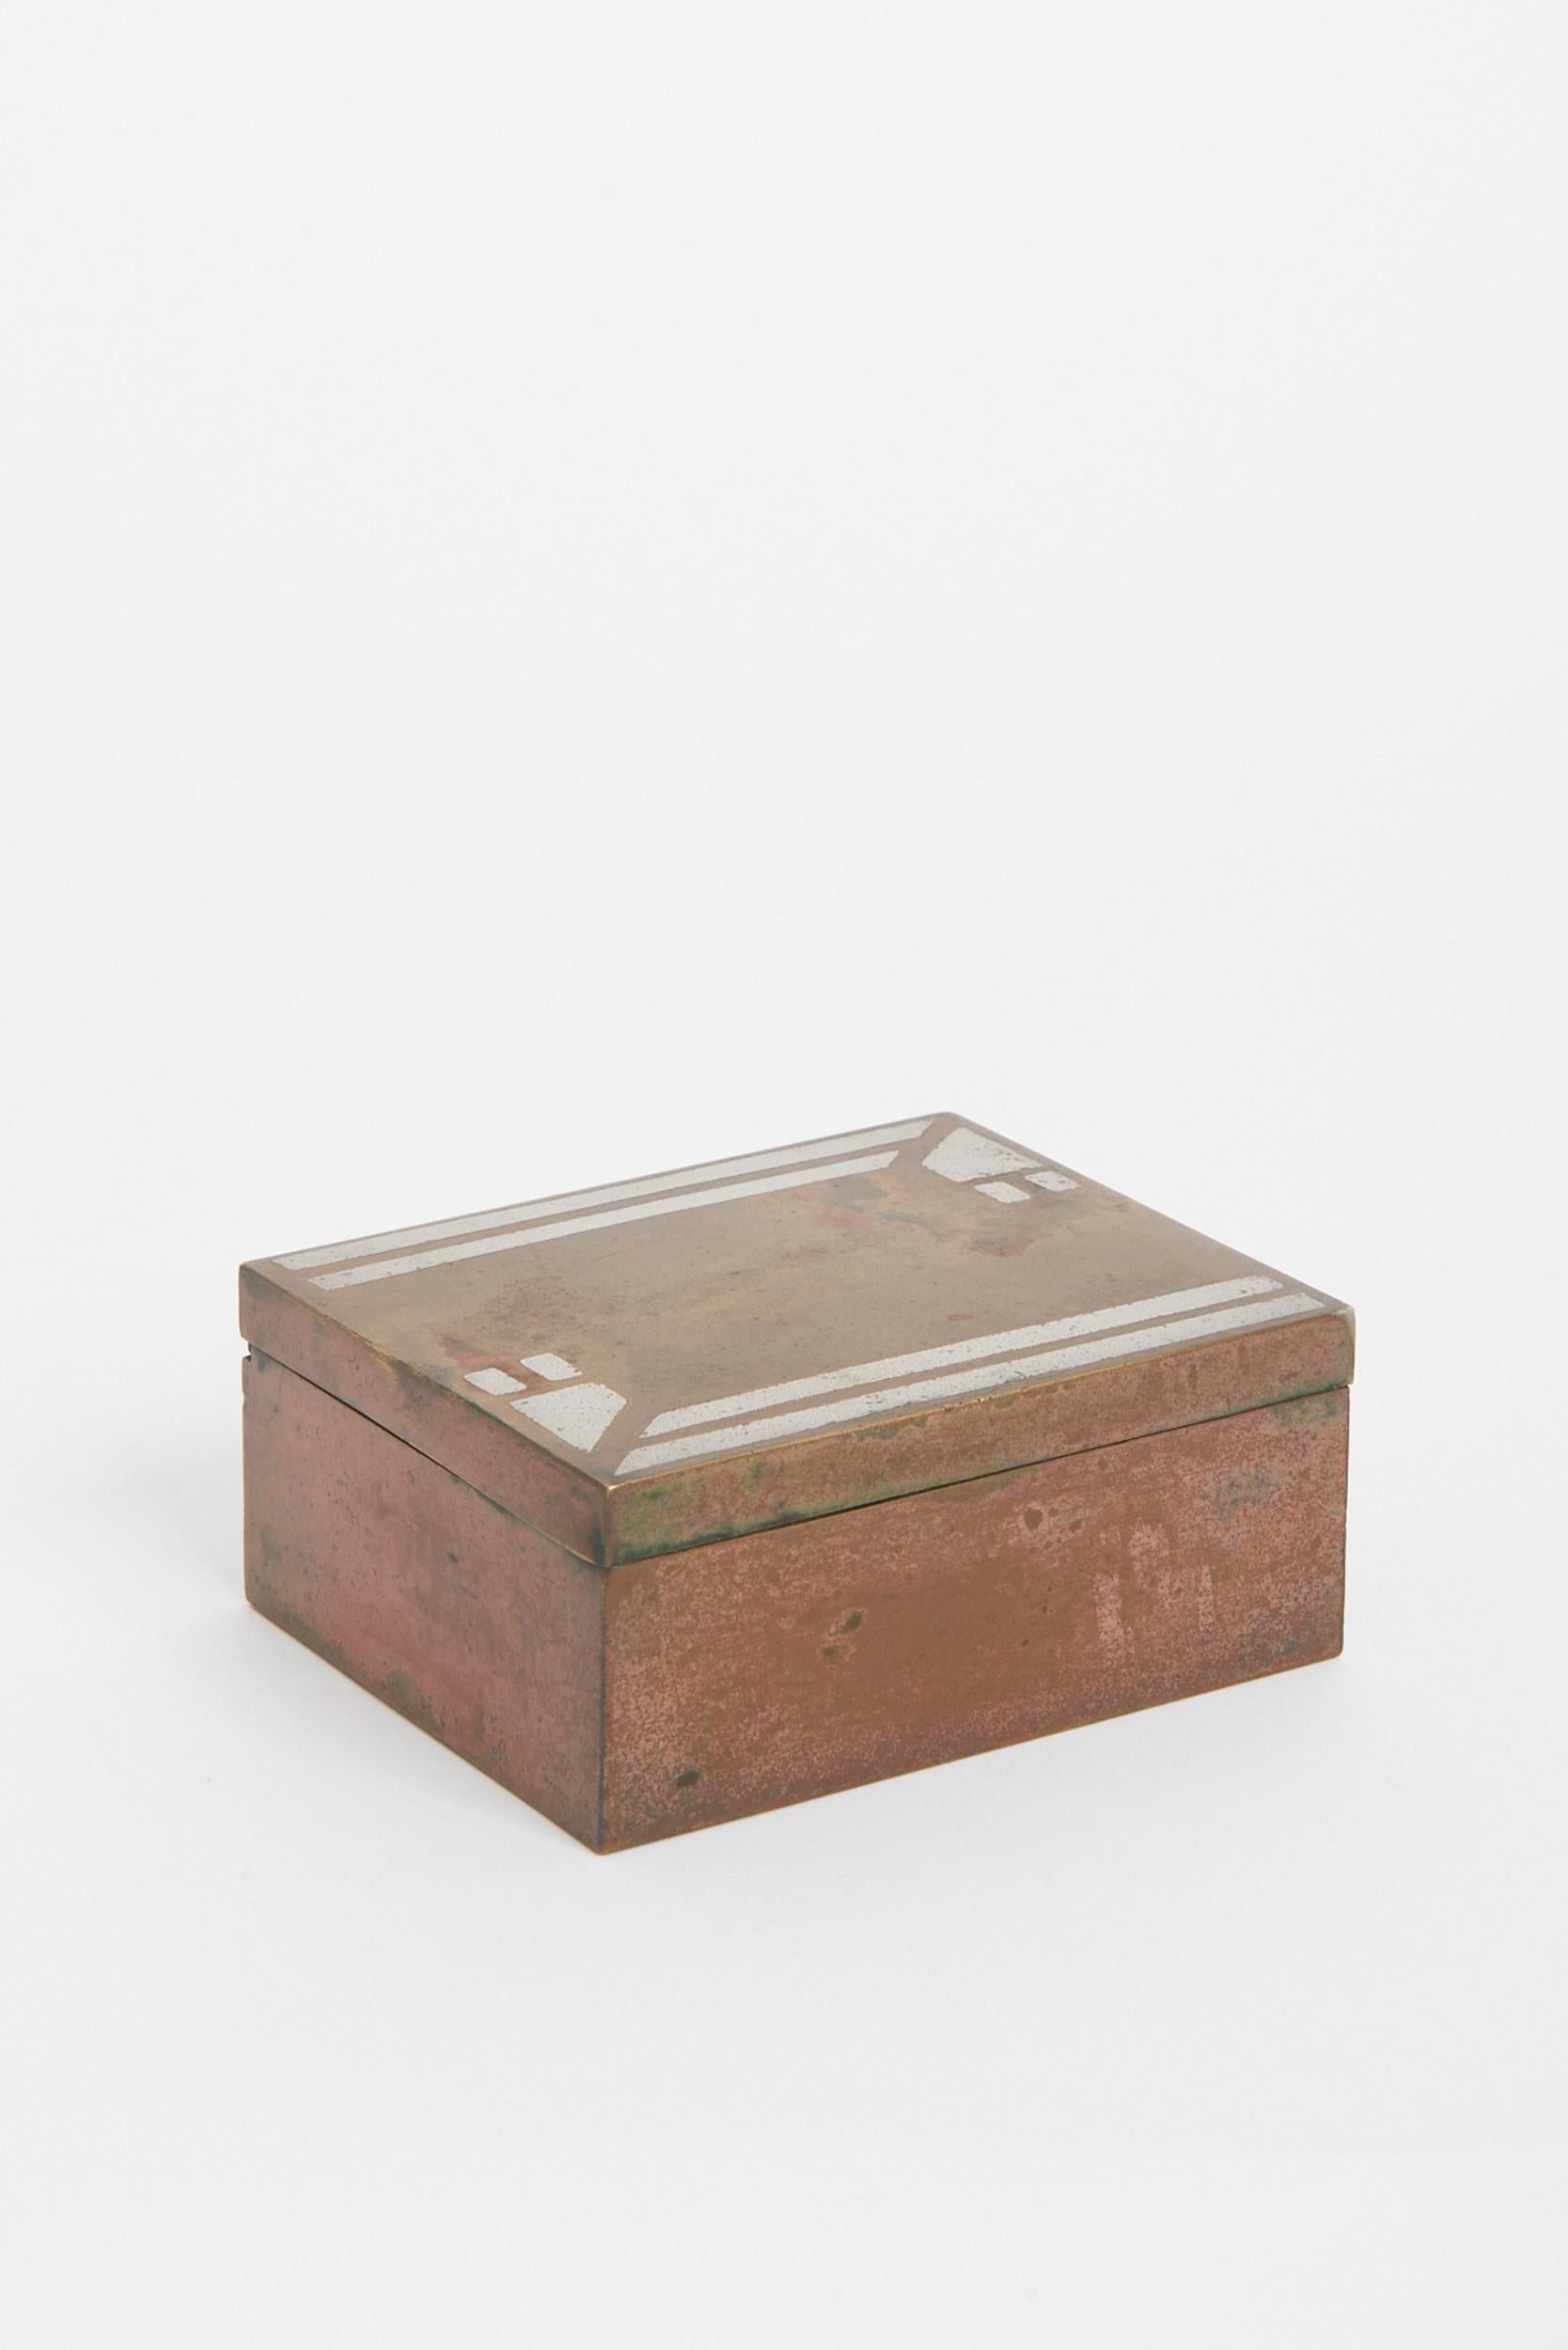 An Art Deco dinanderie brass box.
Signed J. Rodiere.
France, 1930s.